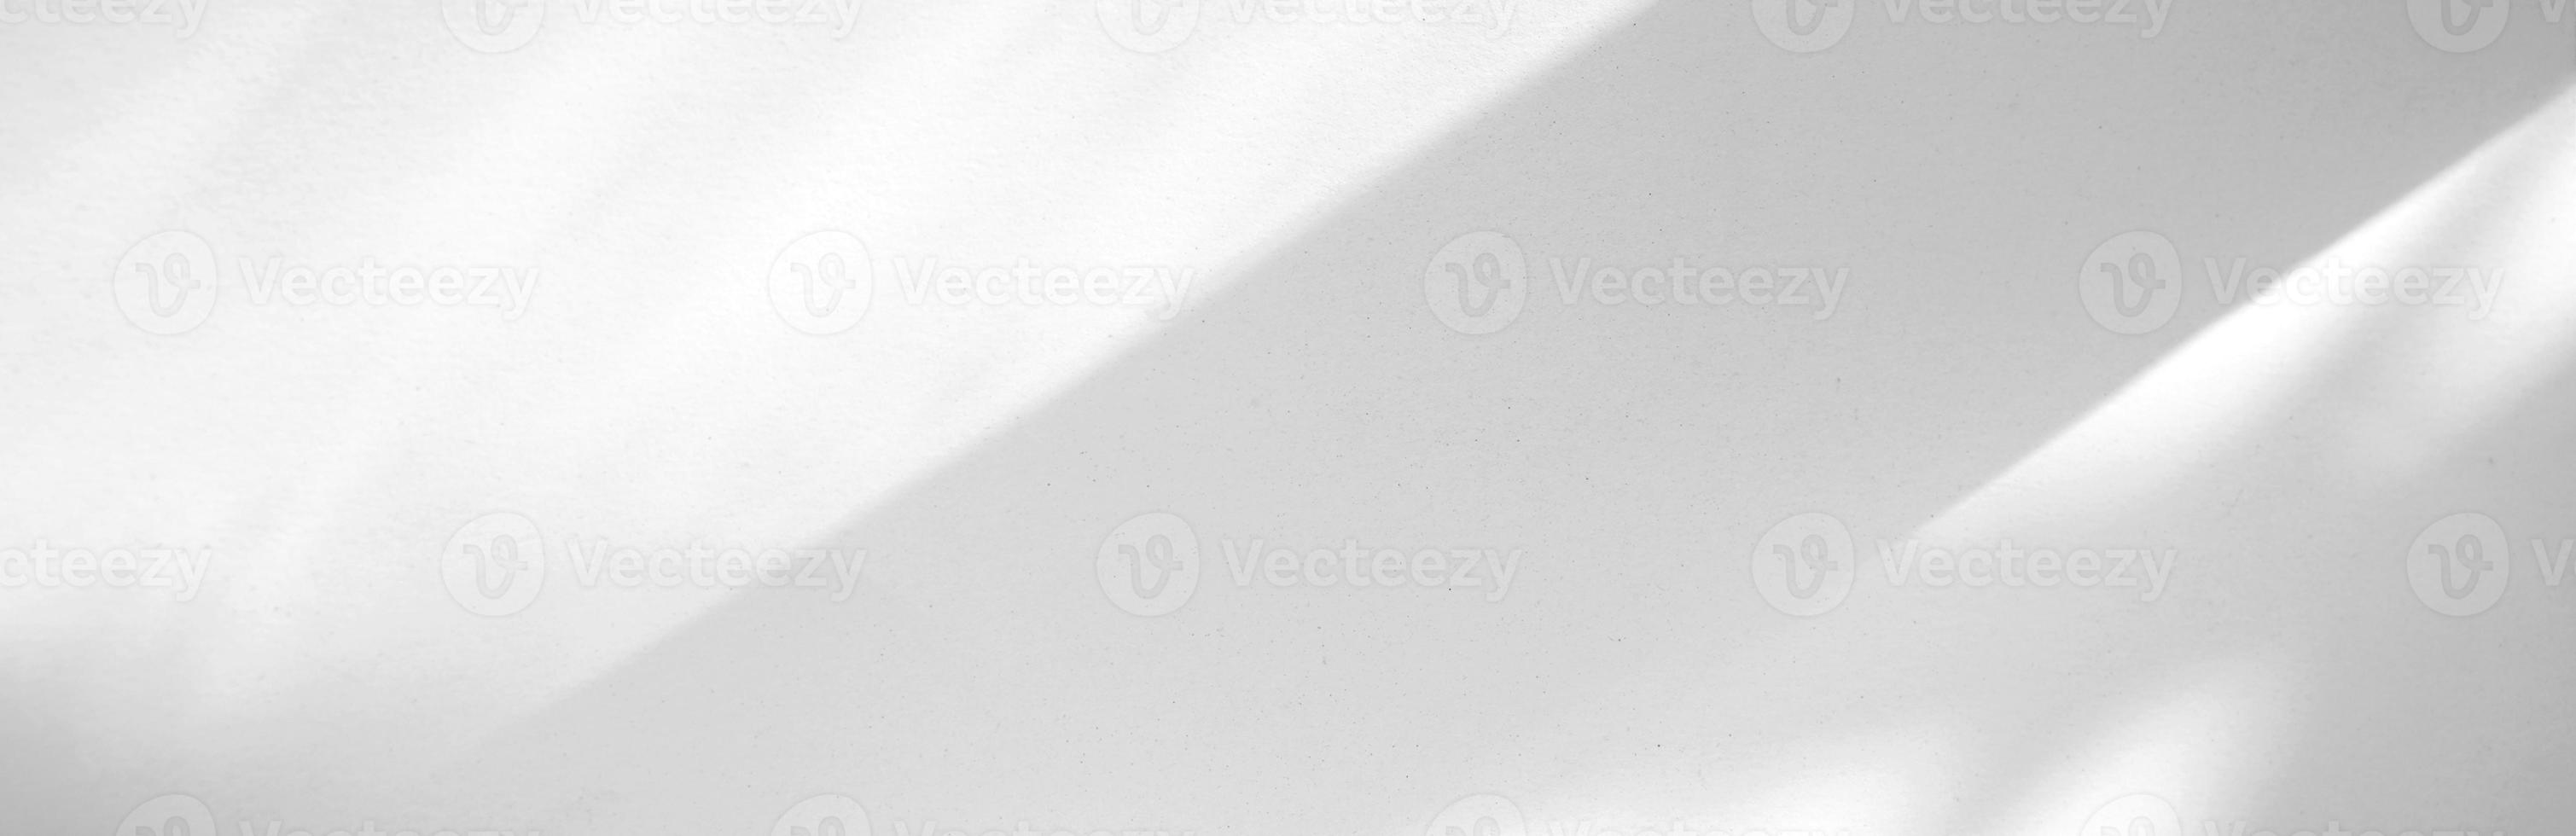 Window natural shadow overlay effect on white texture background, for overlay on product presentation, backdrop and mockup, summer seasonal concept photo